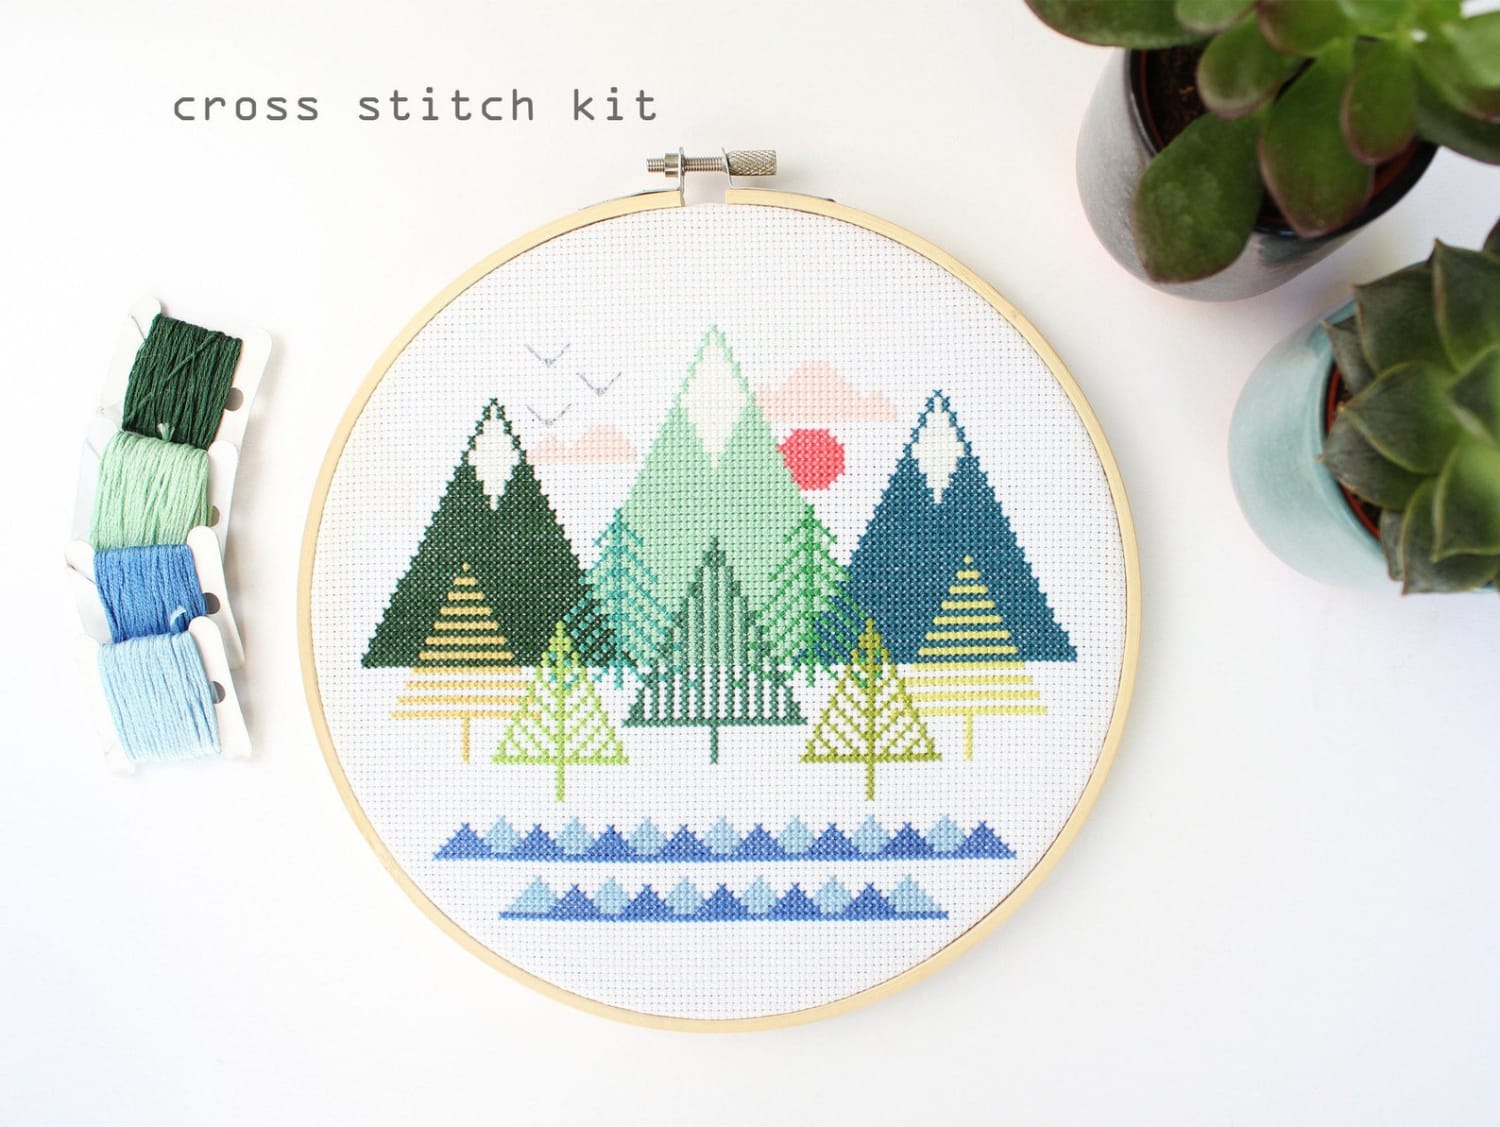 CHAT] Best brand of kits for beginners? : r/CrossStitch